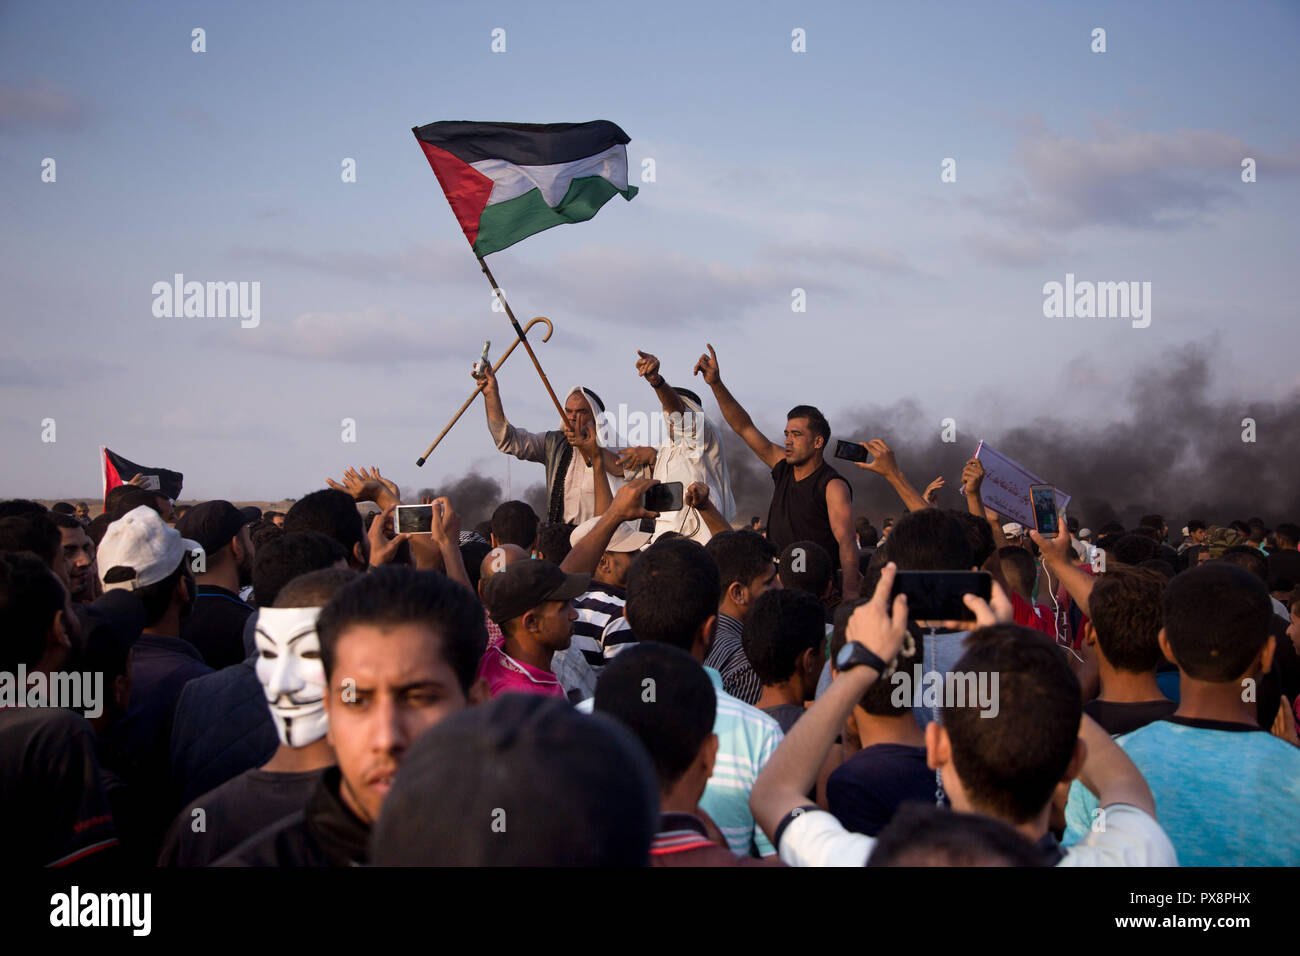 Palestinian demonstrators raise the flag of Palestine during the protest. Palestinians clash with Israeli forces during a protest calling for lifting the Israeli blockade on Gaza and demanding the right to return to their homeland, at the Israel-Gaza border fence in the southern Gaza Strip. Stock Photo